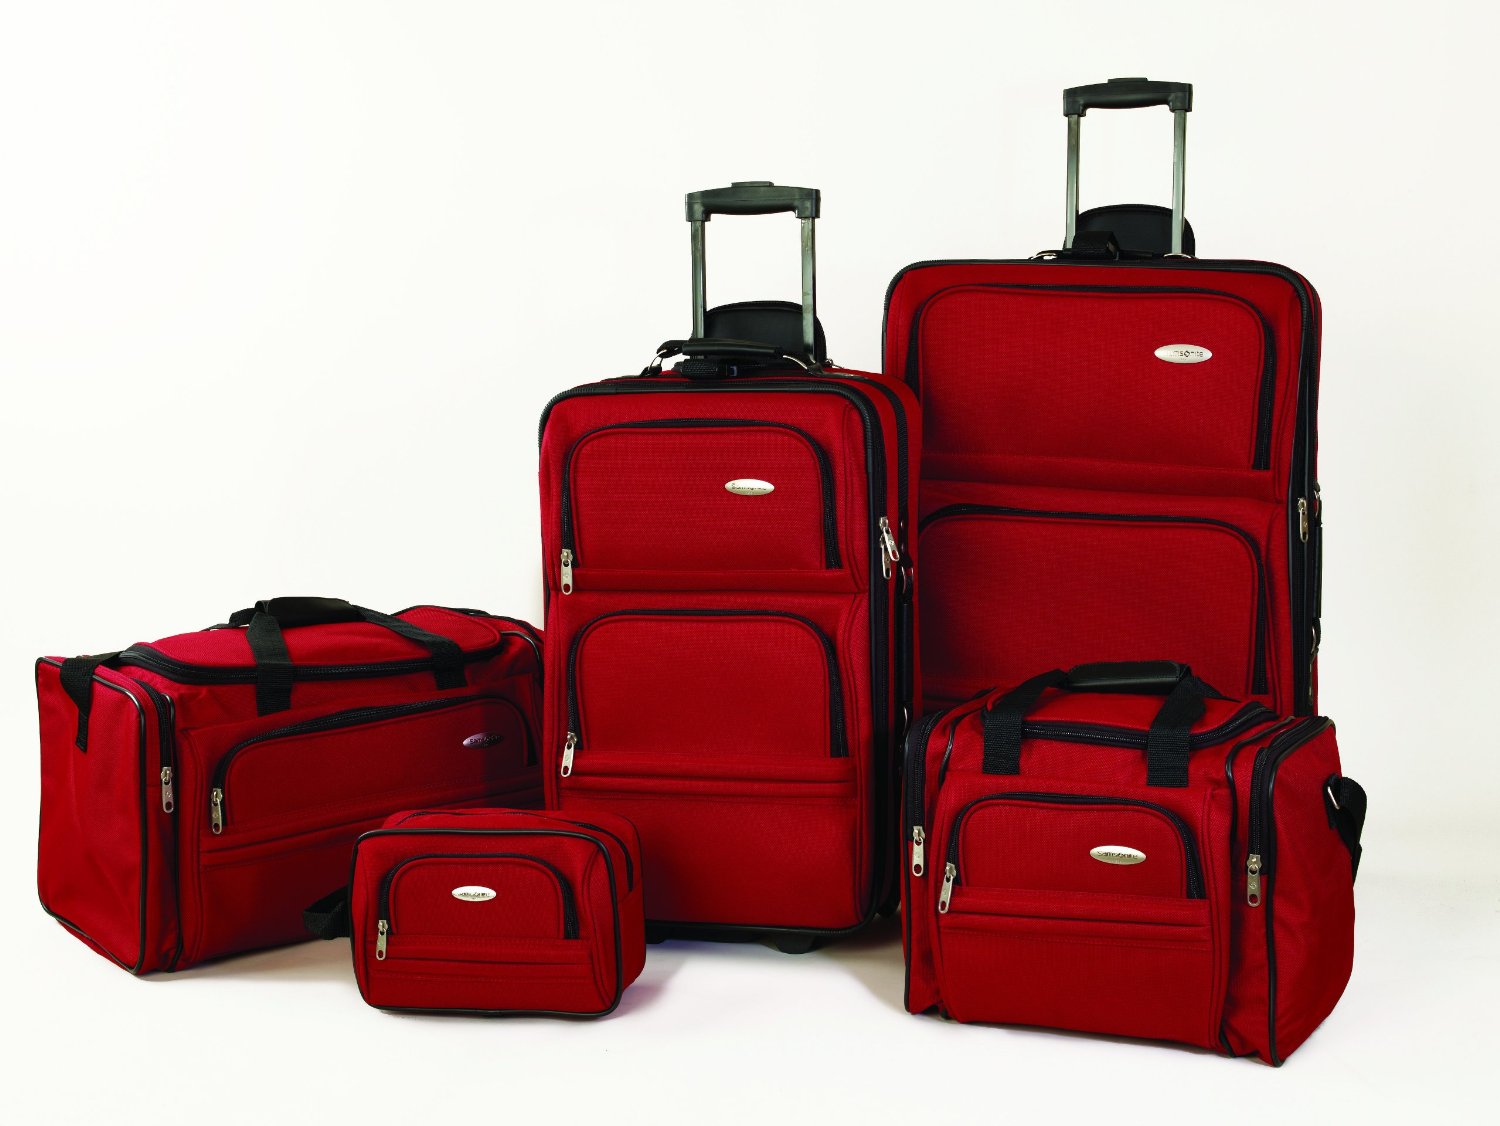 Best luggage reviews How To Choose The Best Luggage Set